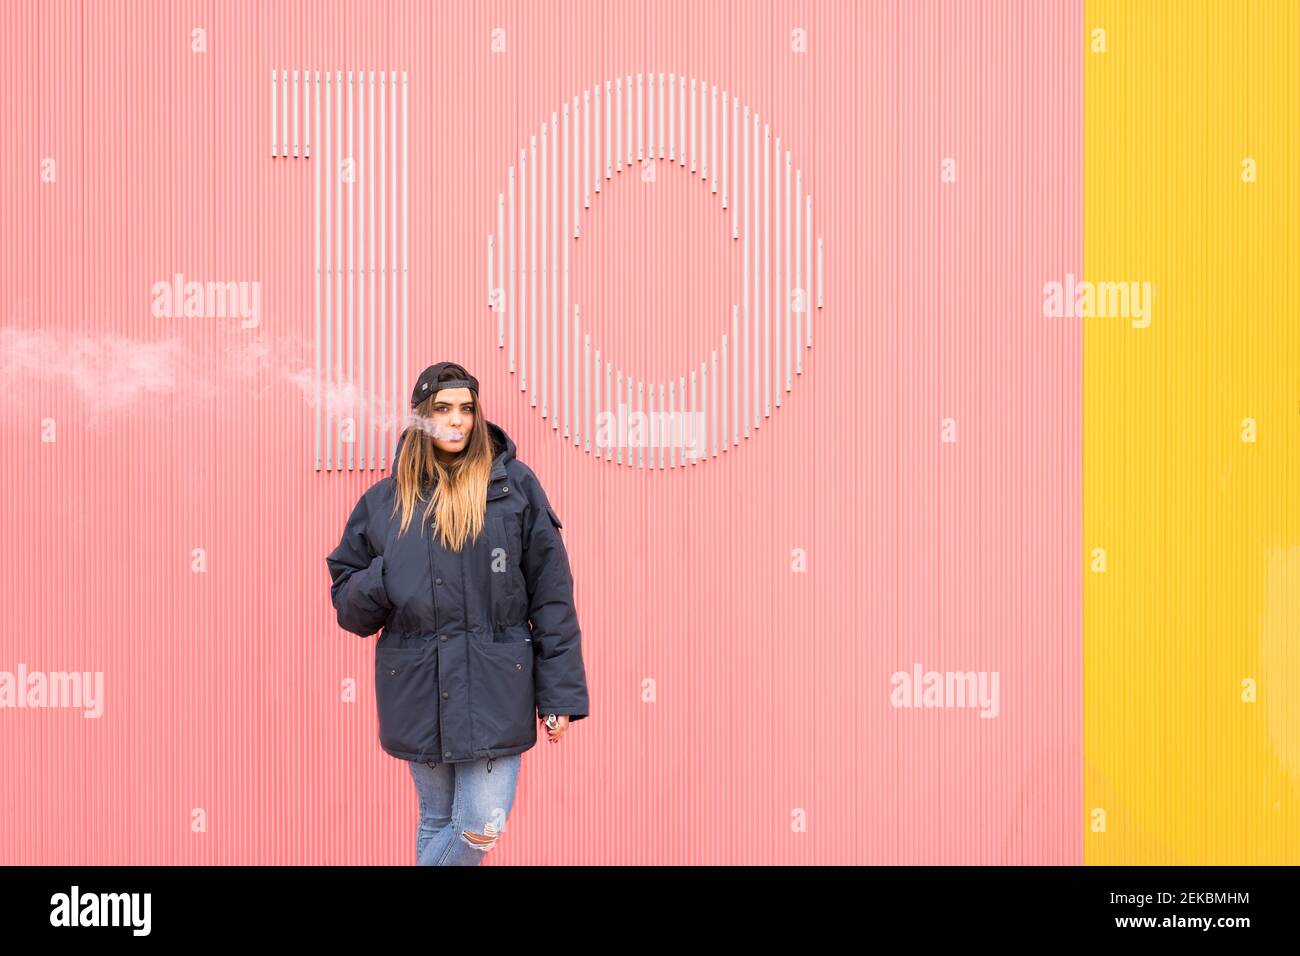 Young woman in jacket exhaling smoke against pink and yellow wall Stock Photo